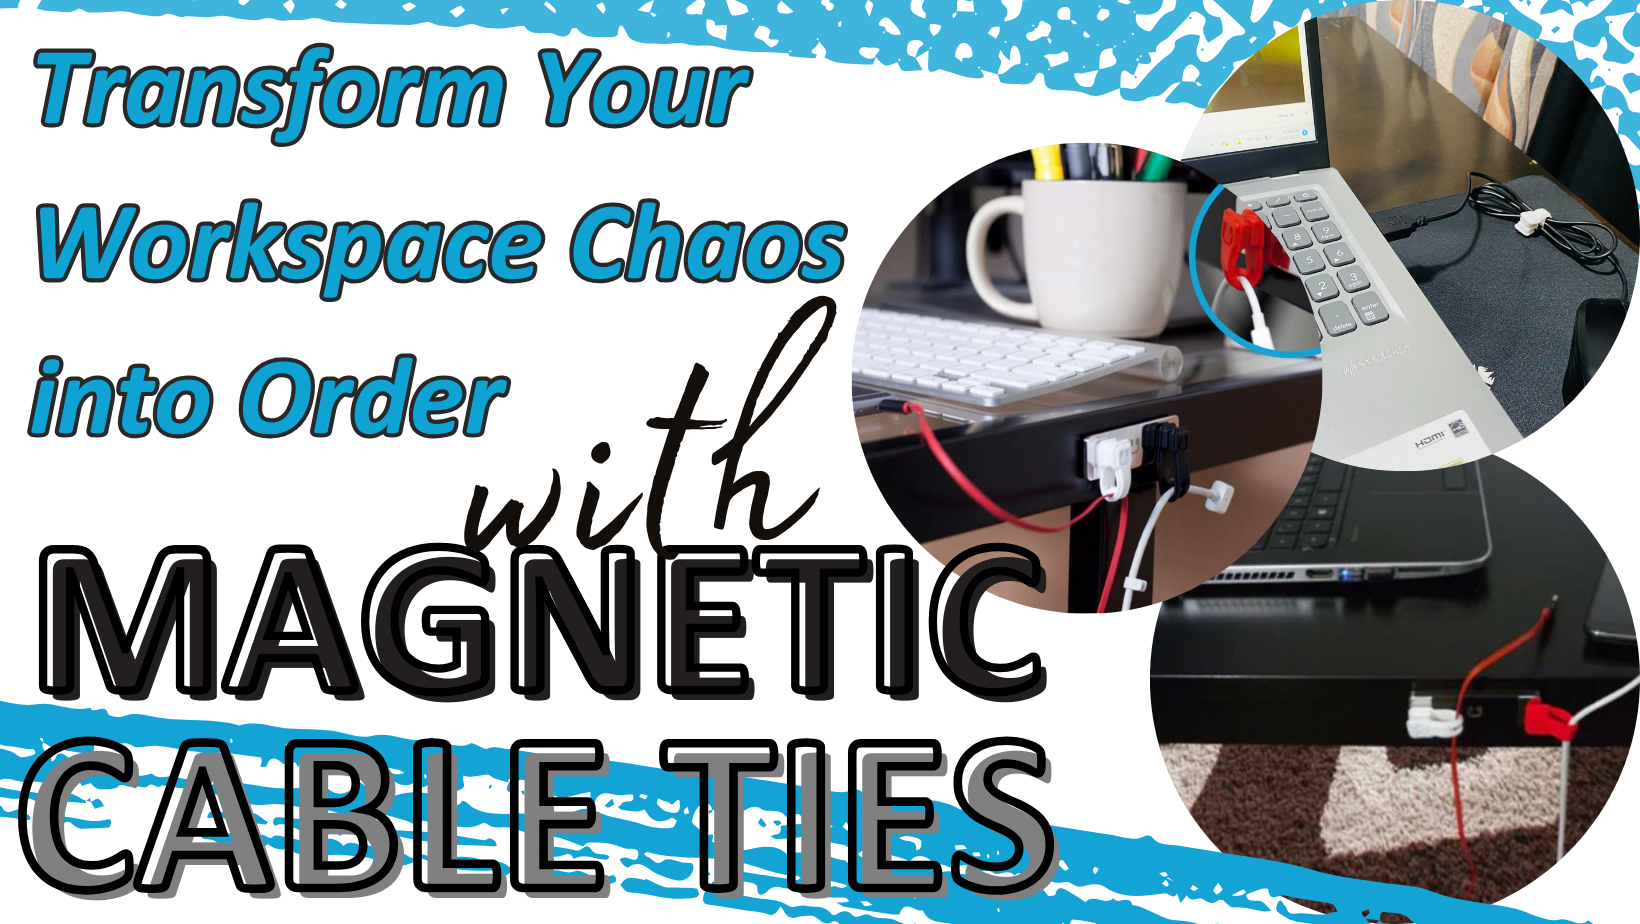 Transform Your Workspace Chaos into Order with Magnetic Cable Ties